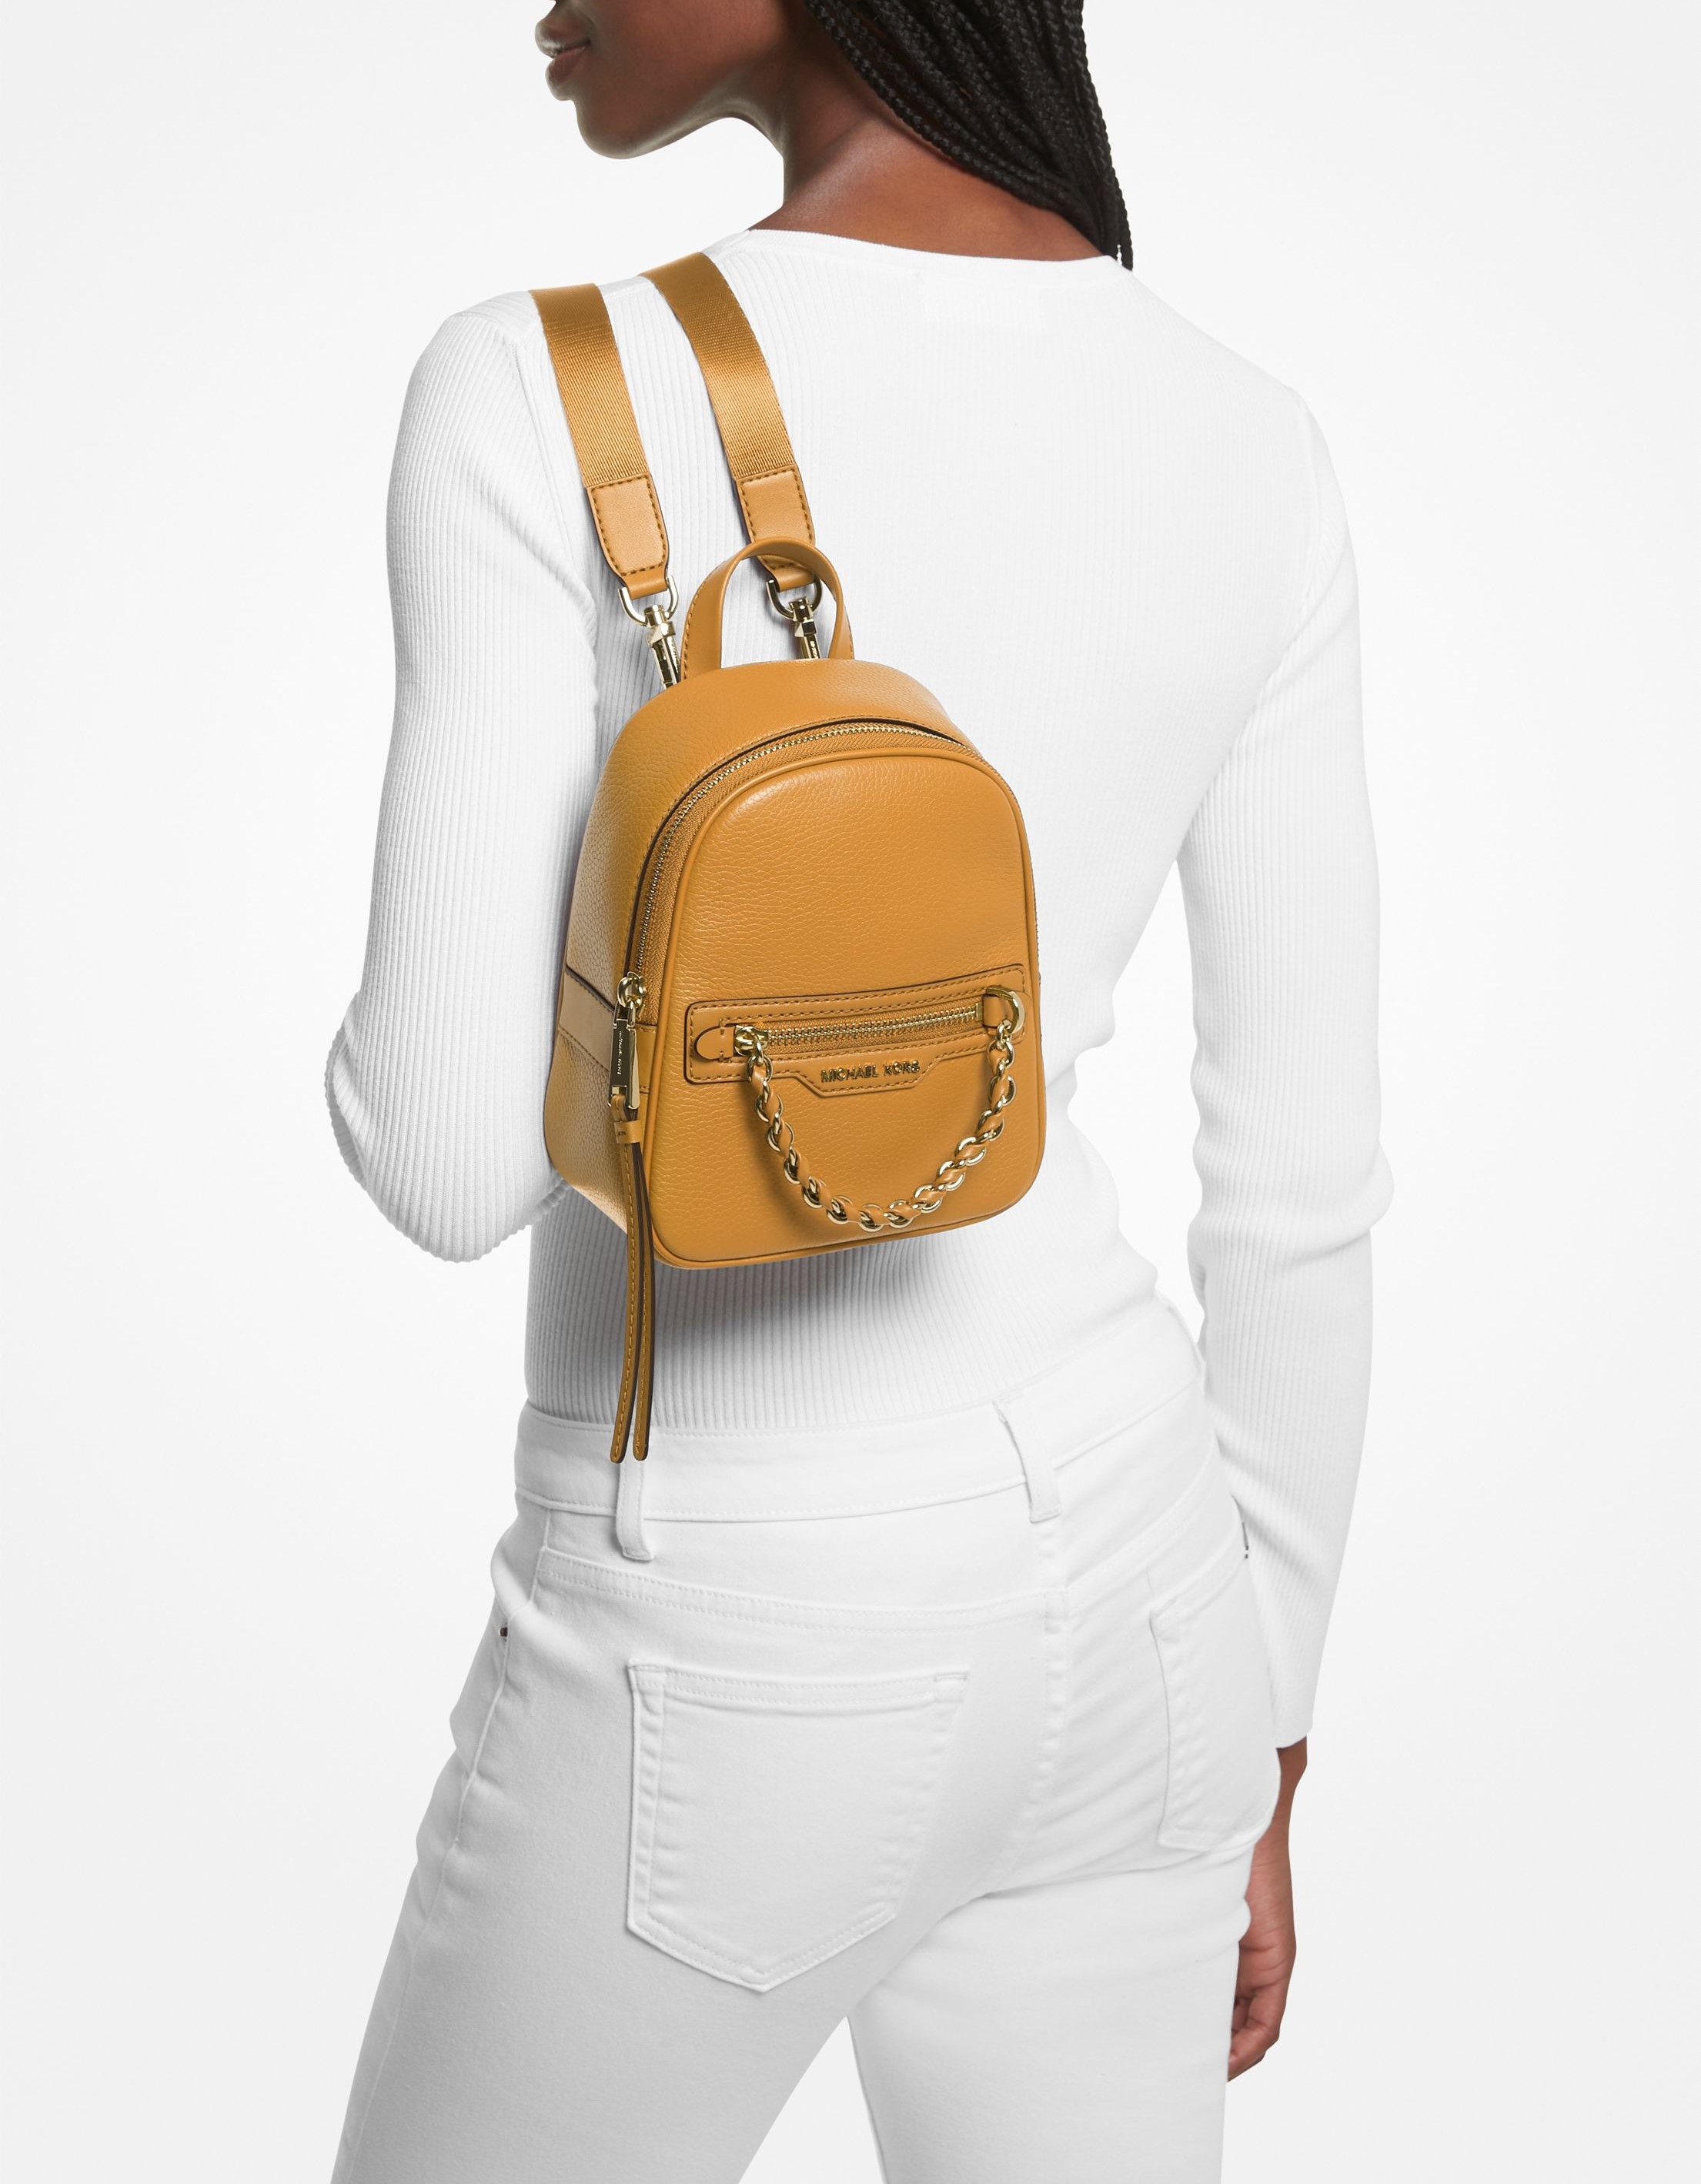 BALO MK NỮ MICHAEL KORS ELLIOT EXTRA SMALL YELLOW LEATHER BACKPACK 30F3G5EB0L878 4